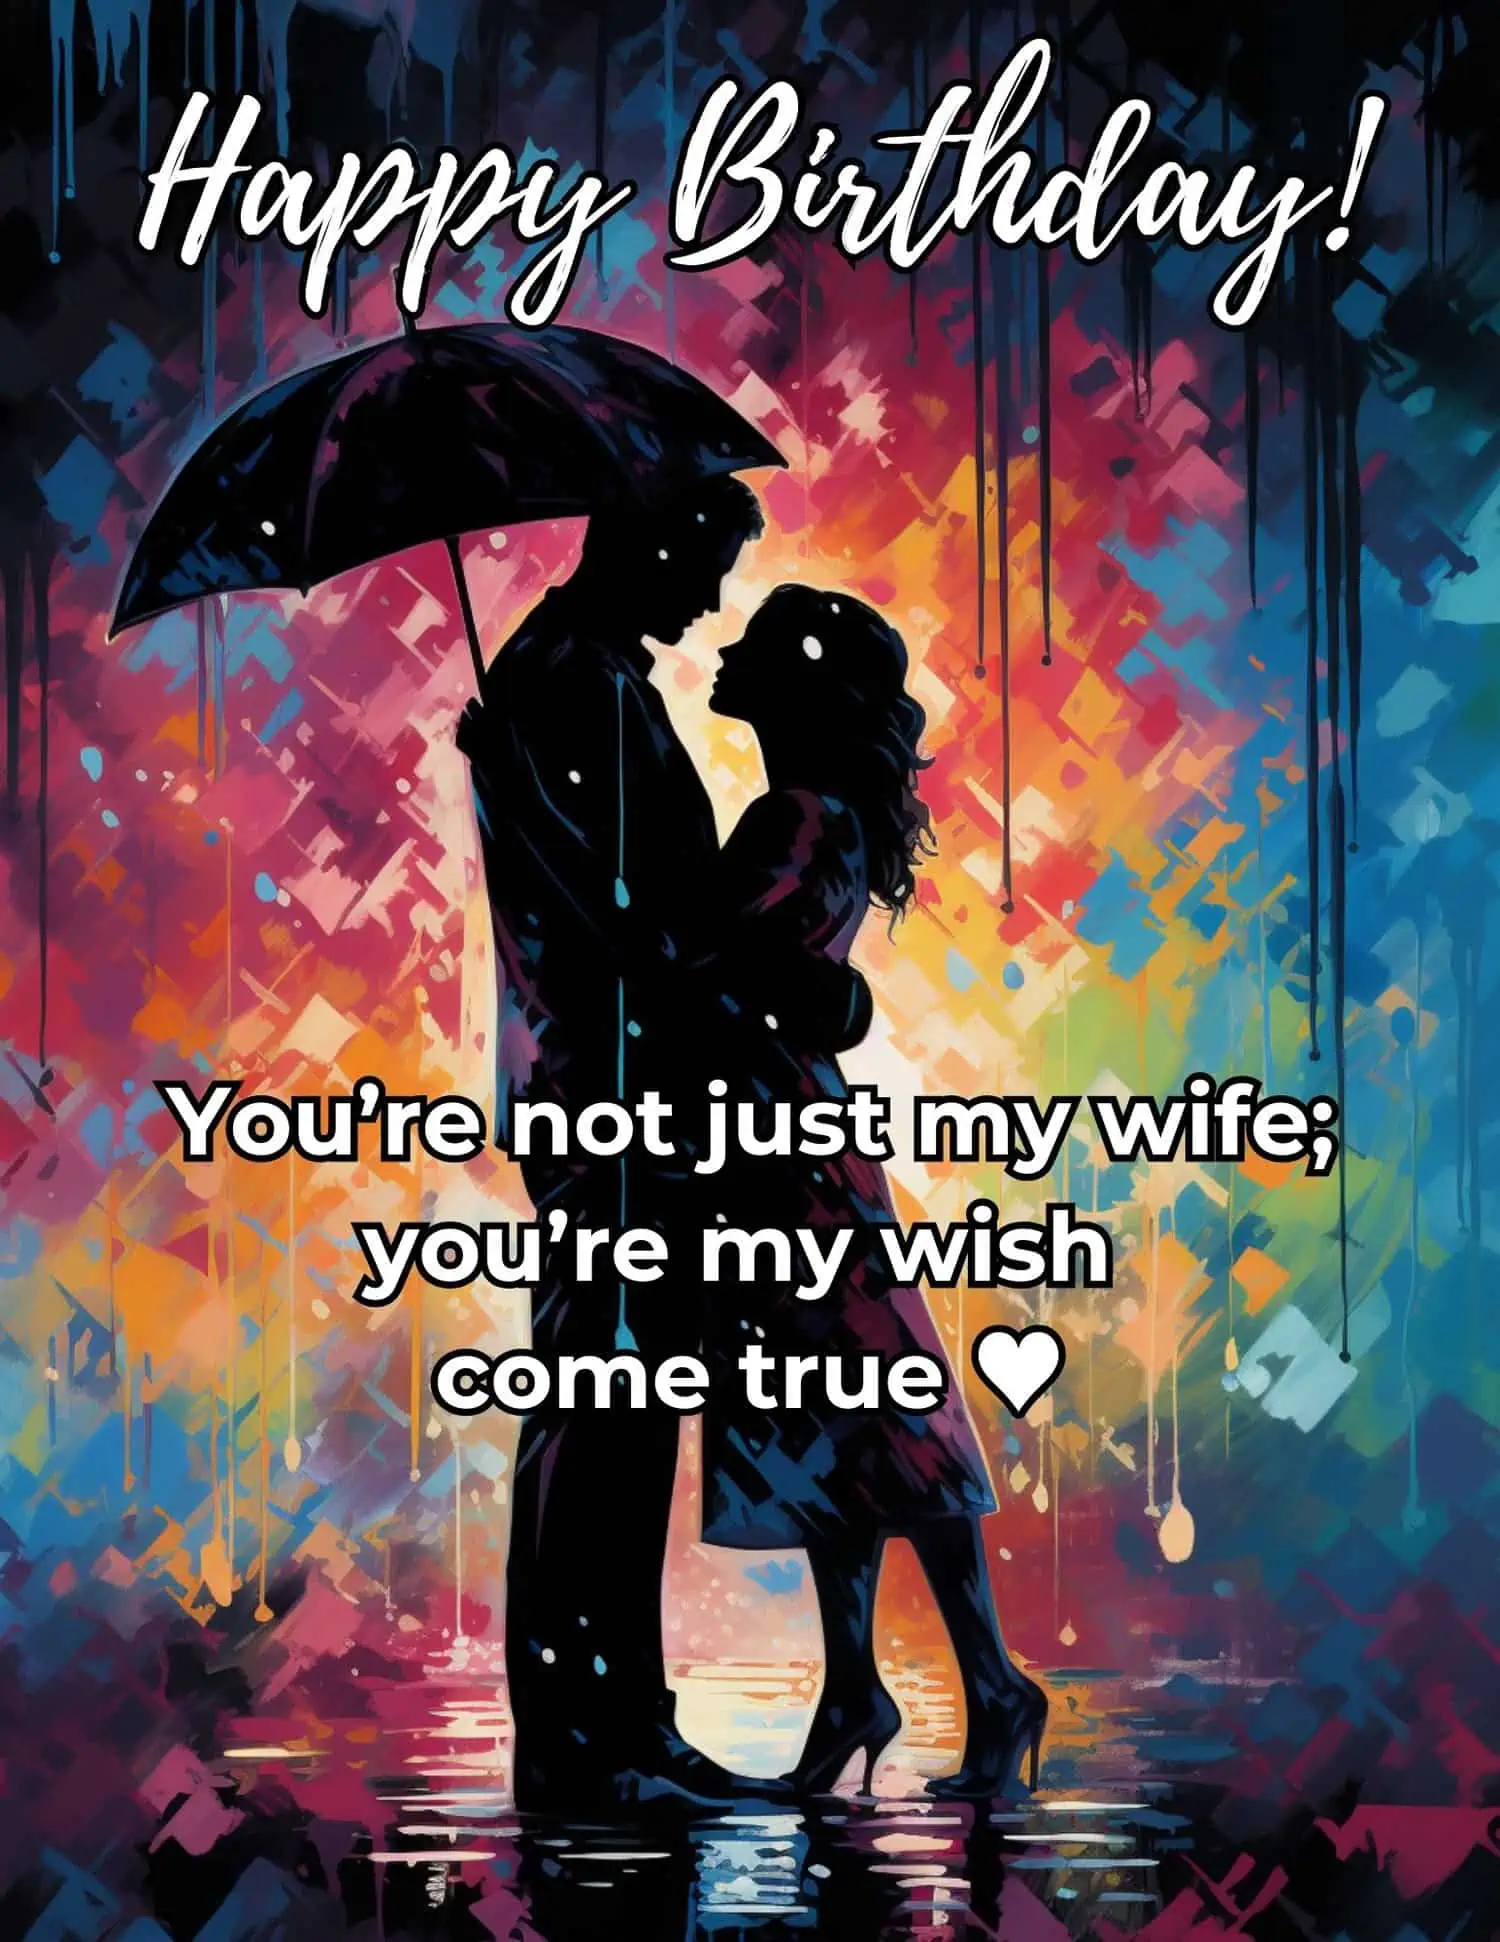 Charming wishes to brighten up your wife's birthday.